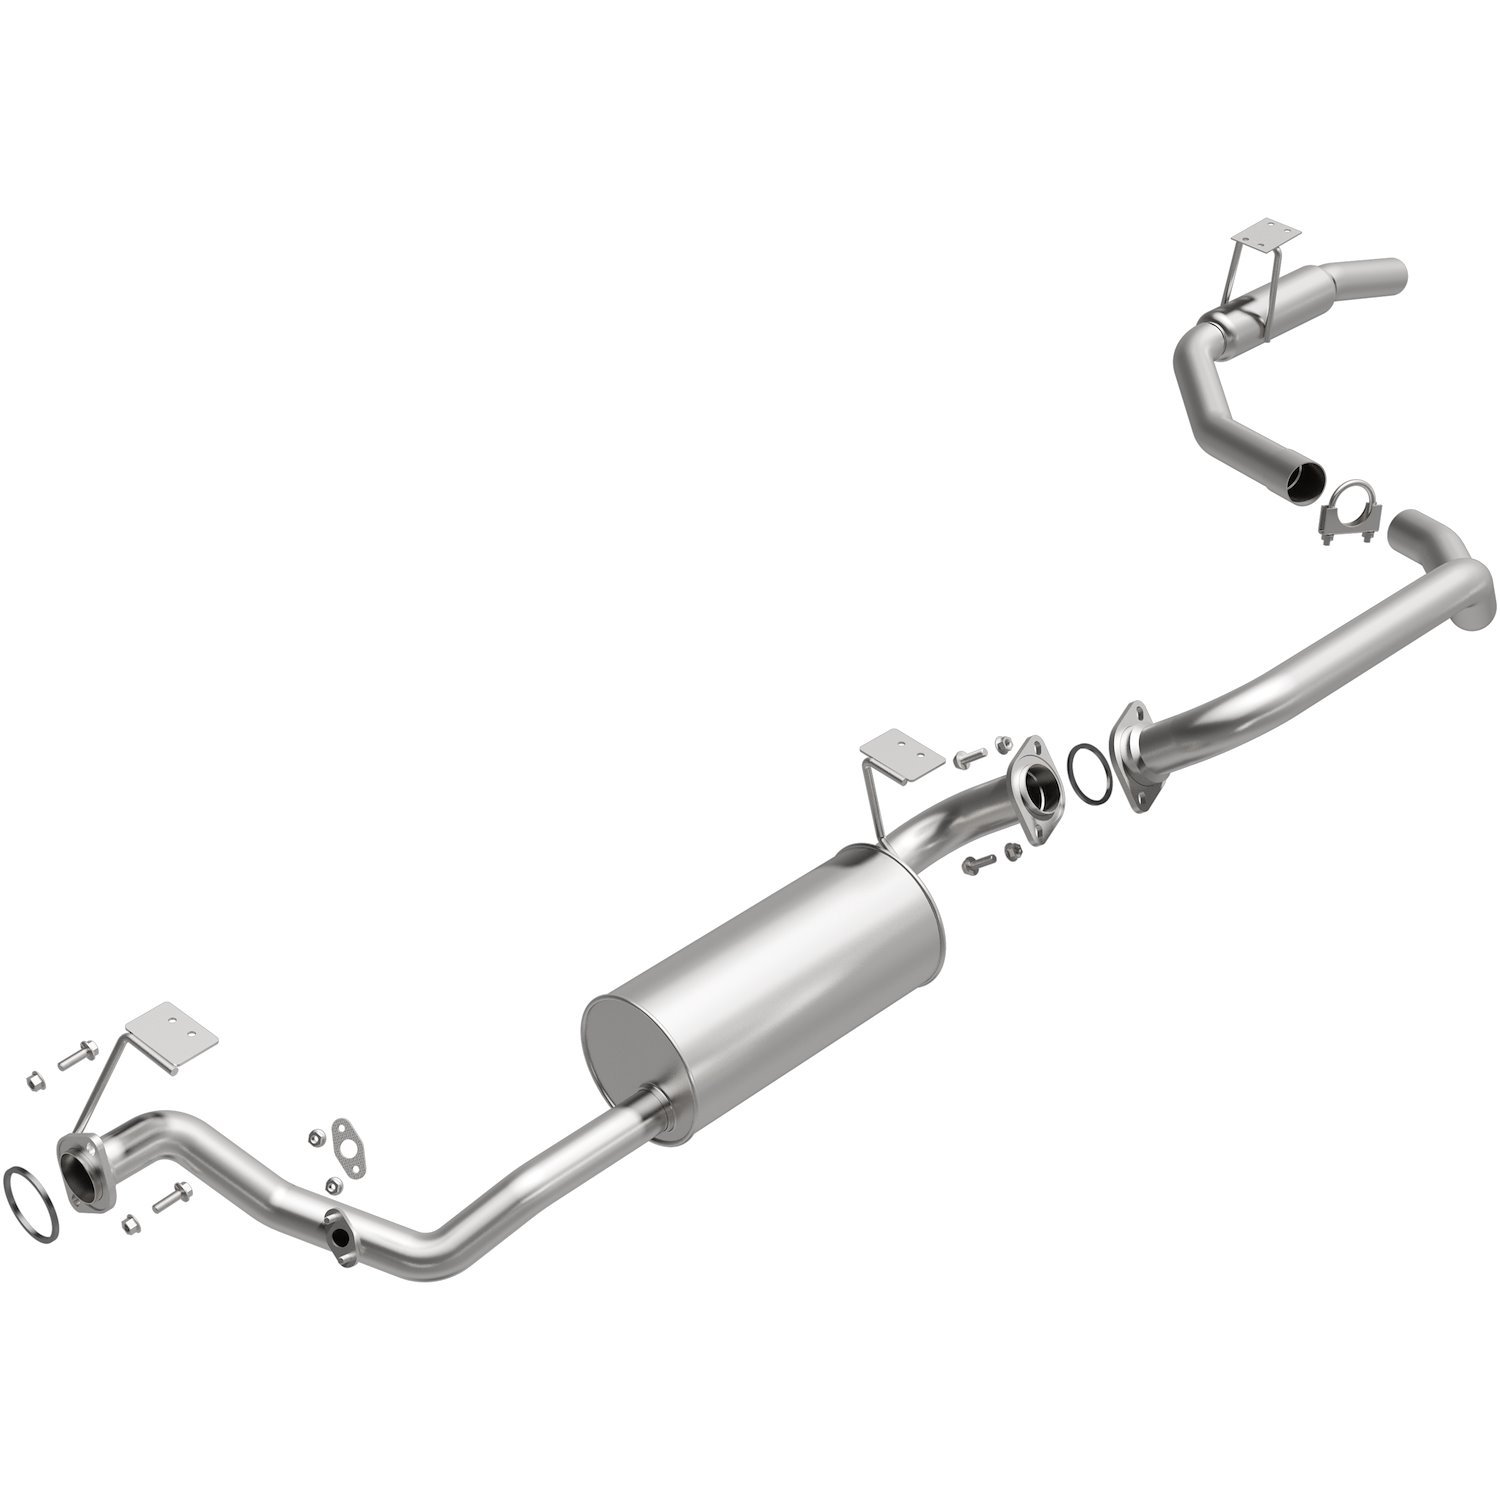 Direct-Fit Exhaust Kit, 1995-1997 LX450 Land Cruiser 4.5L